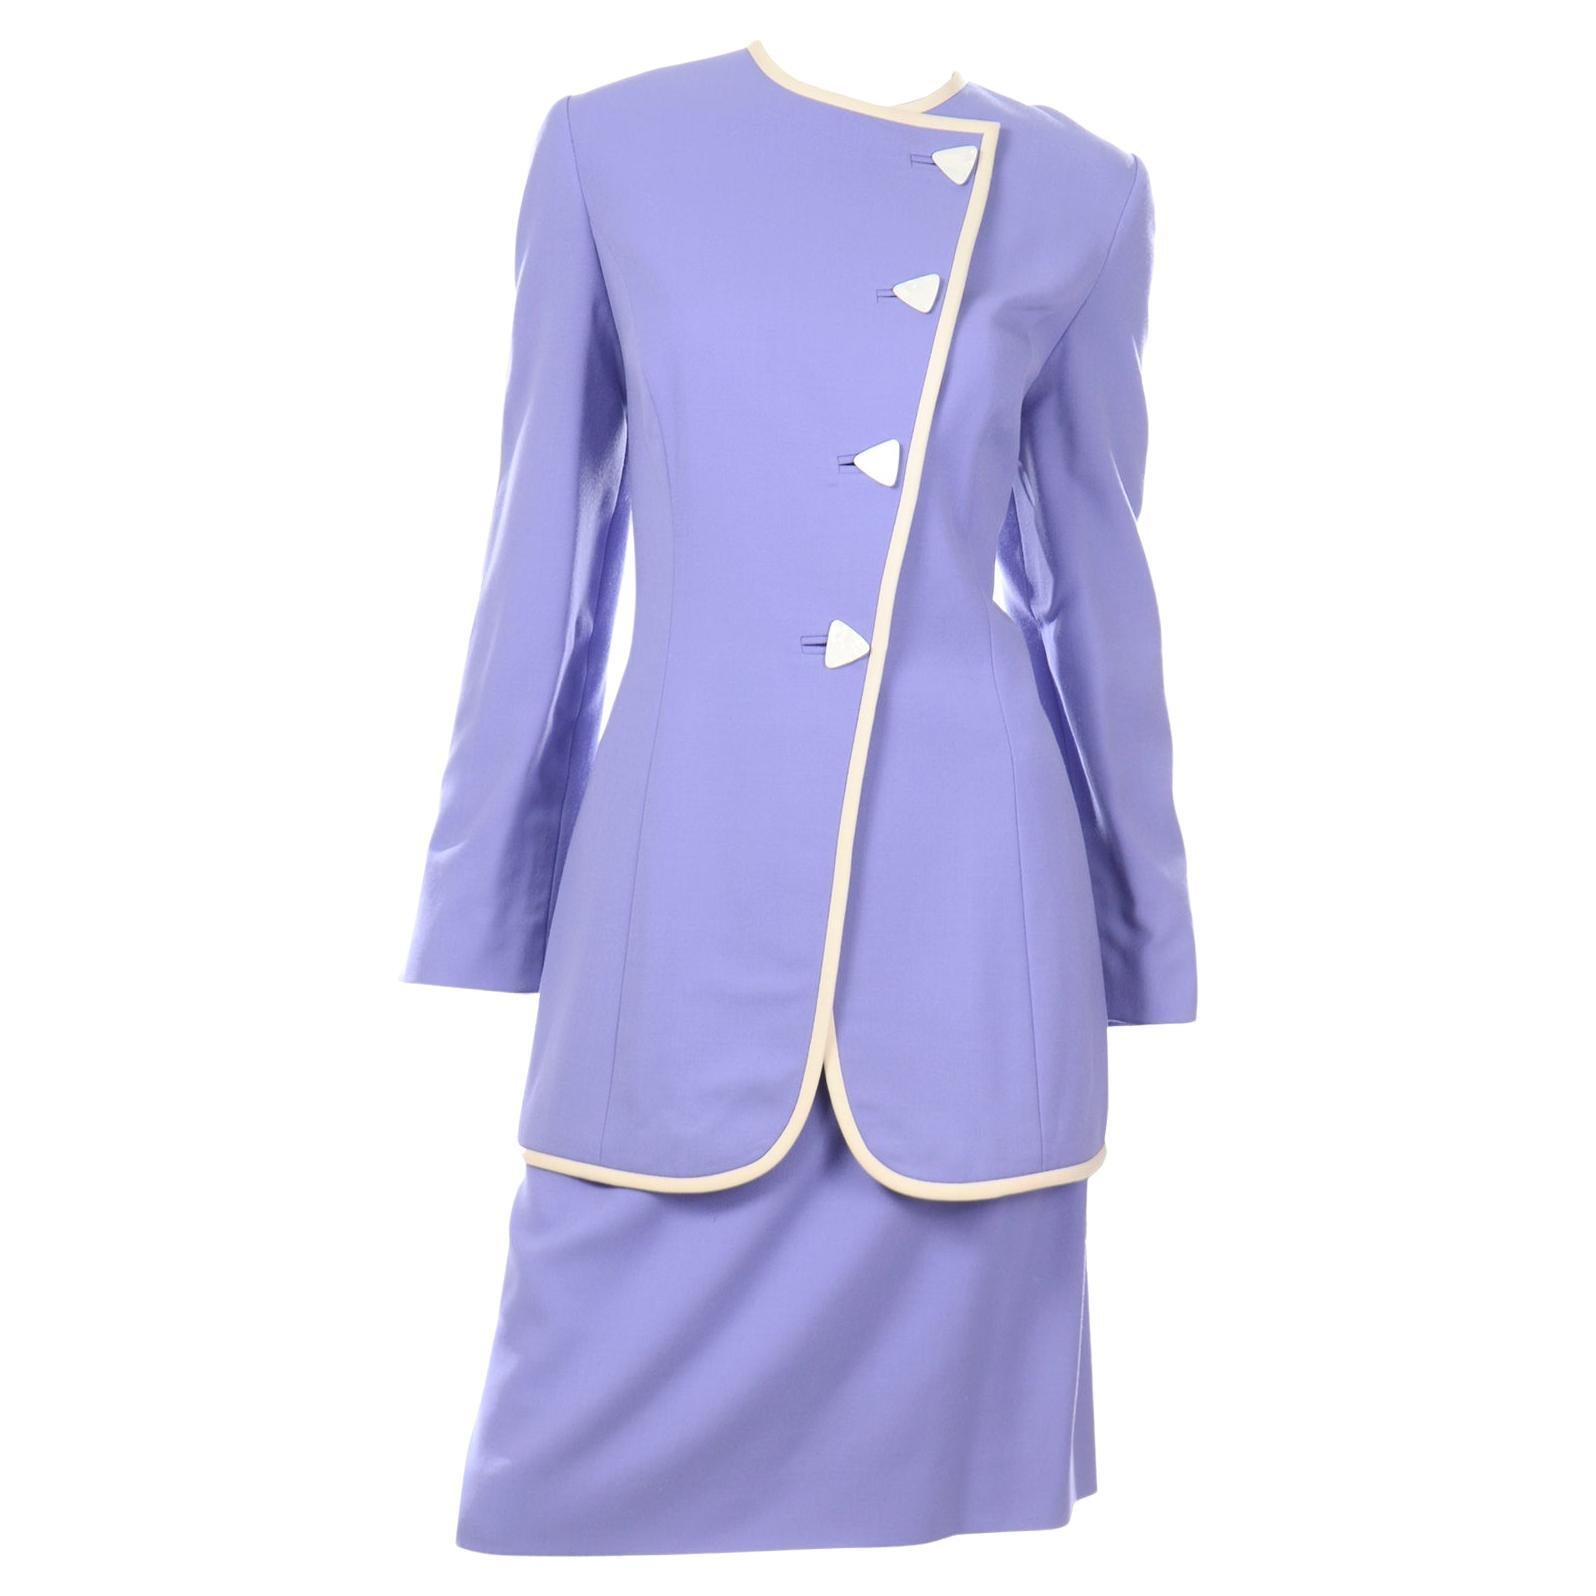 Vintage David Hayes Periwinkle Purple Jacket & Skirt Suit w Shell Buttons